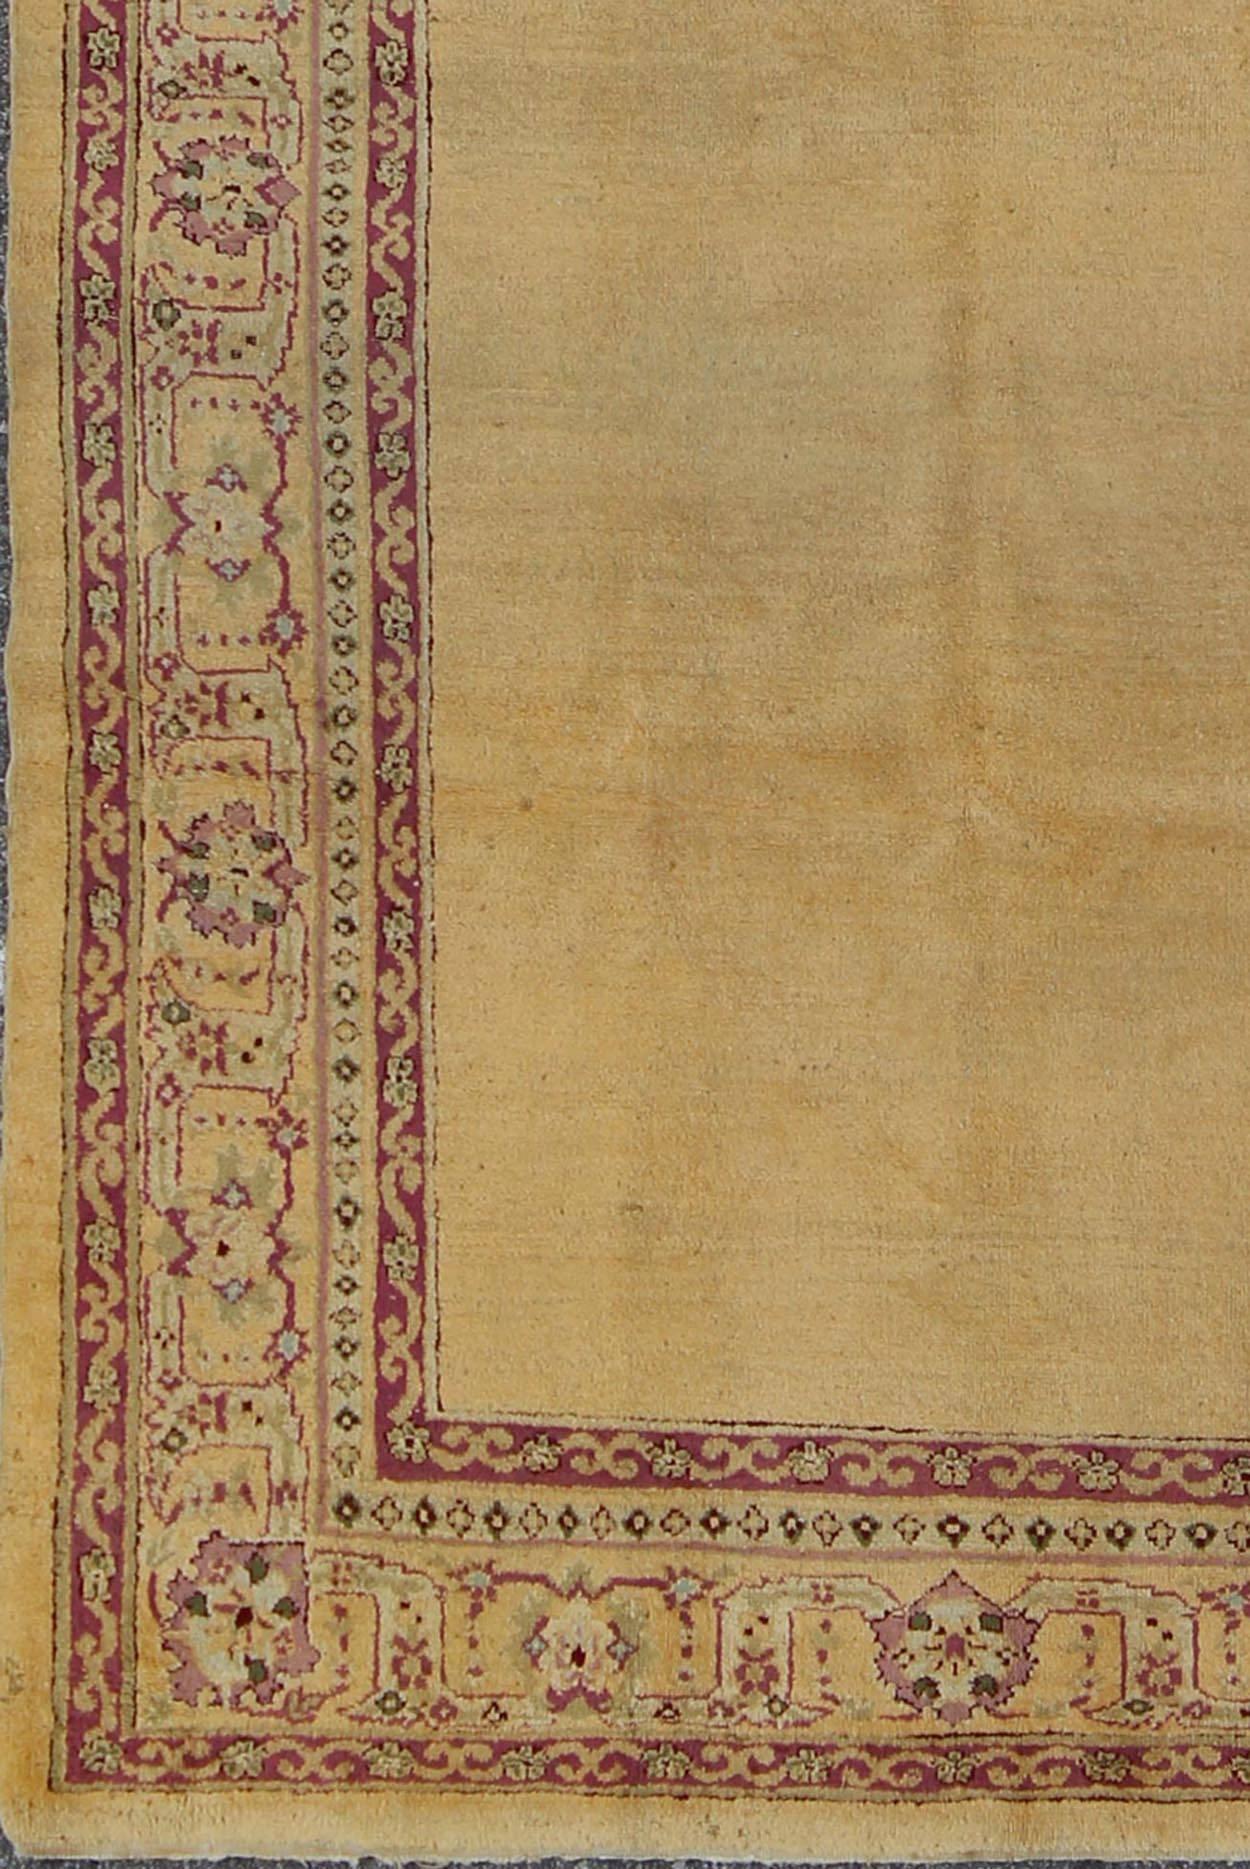 Antique Indian Amritsar rug with solid field of creamy yellow and ornate lavender and red border, Keivan Woven Arts / rug G-0206, country of origin / type: India / Amritsar, circa 1910

This carpet was woven in Amritsar in the early 20th century